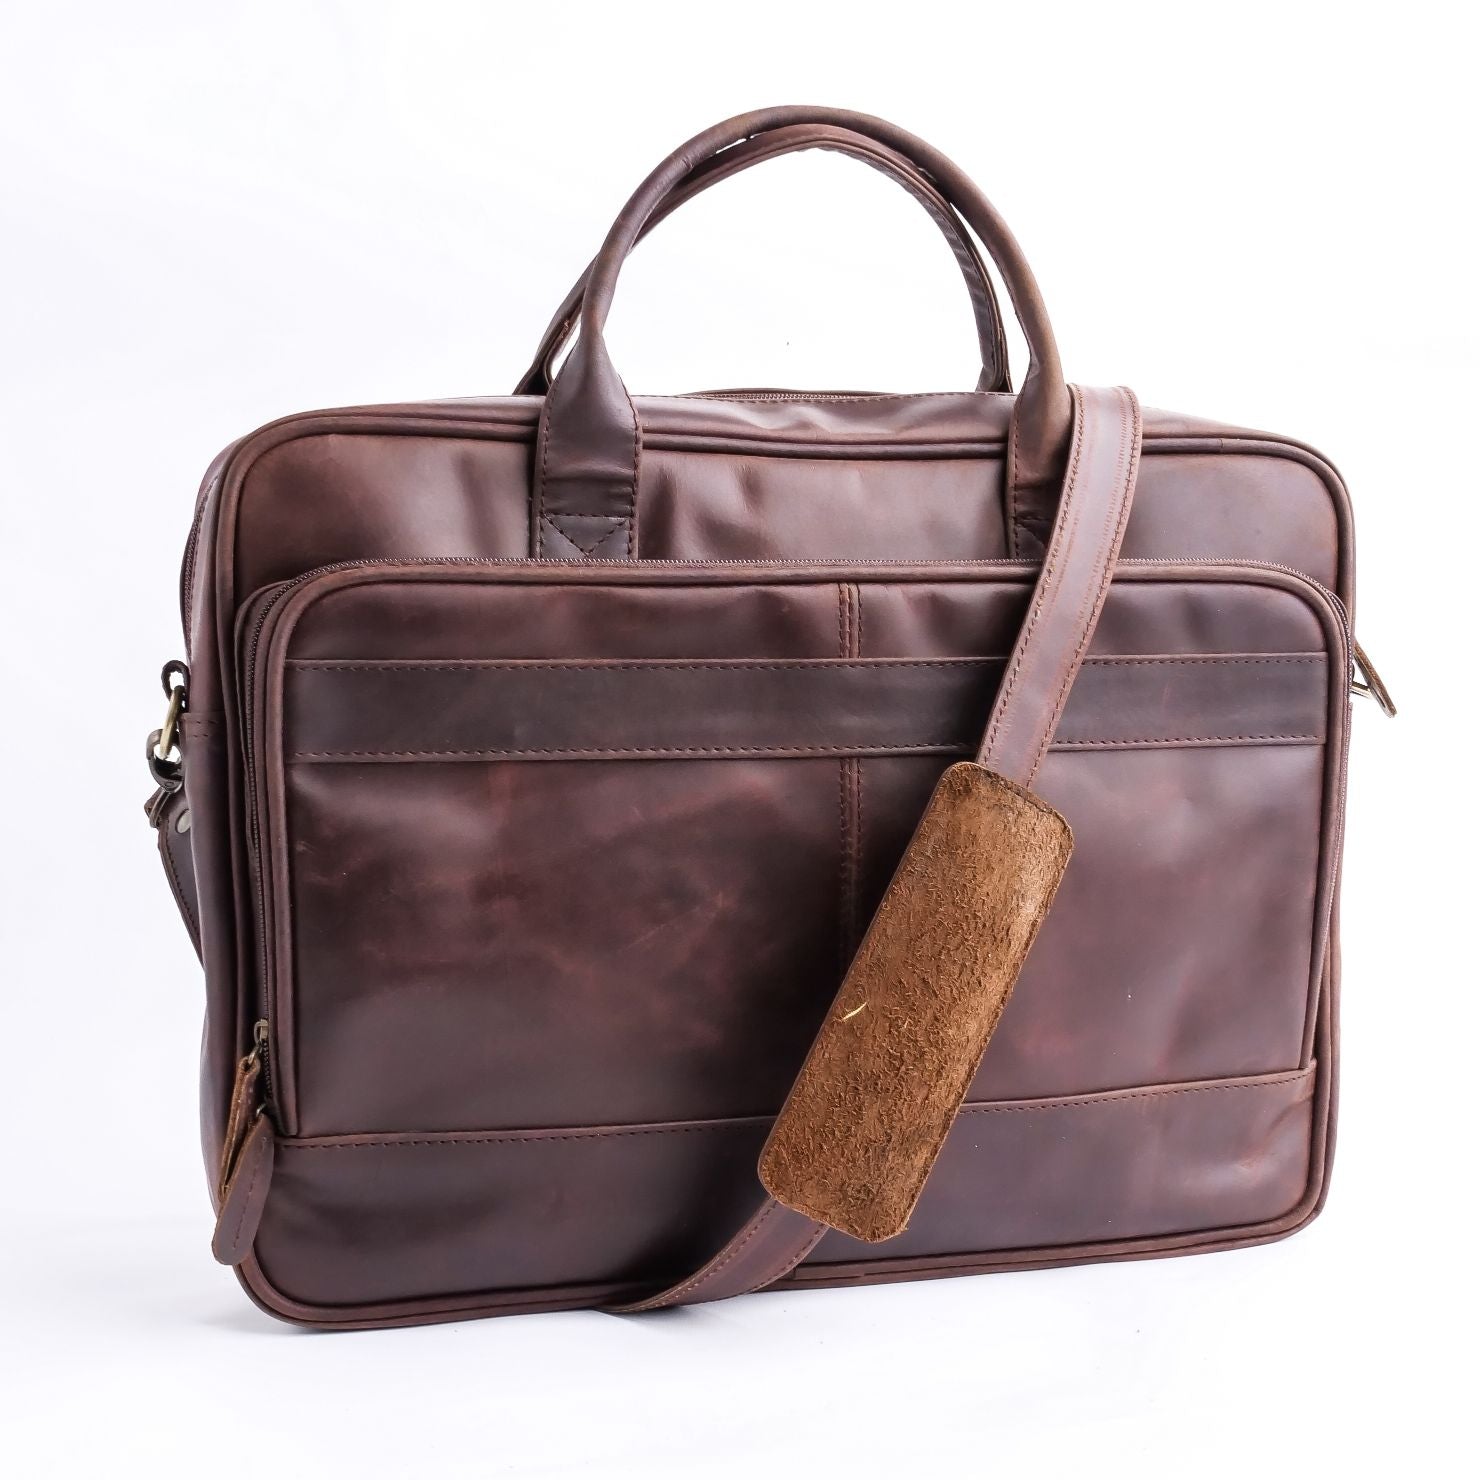 Everyday Companion Leather Laptop Bag-Vintage Midnight Brown